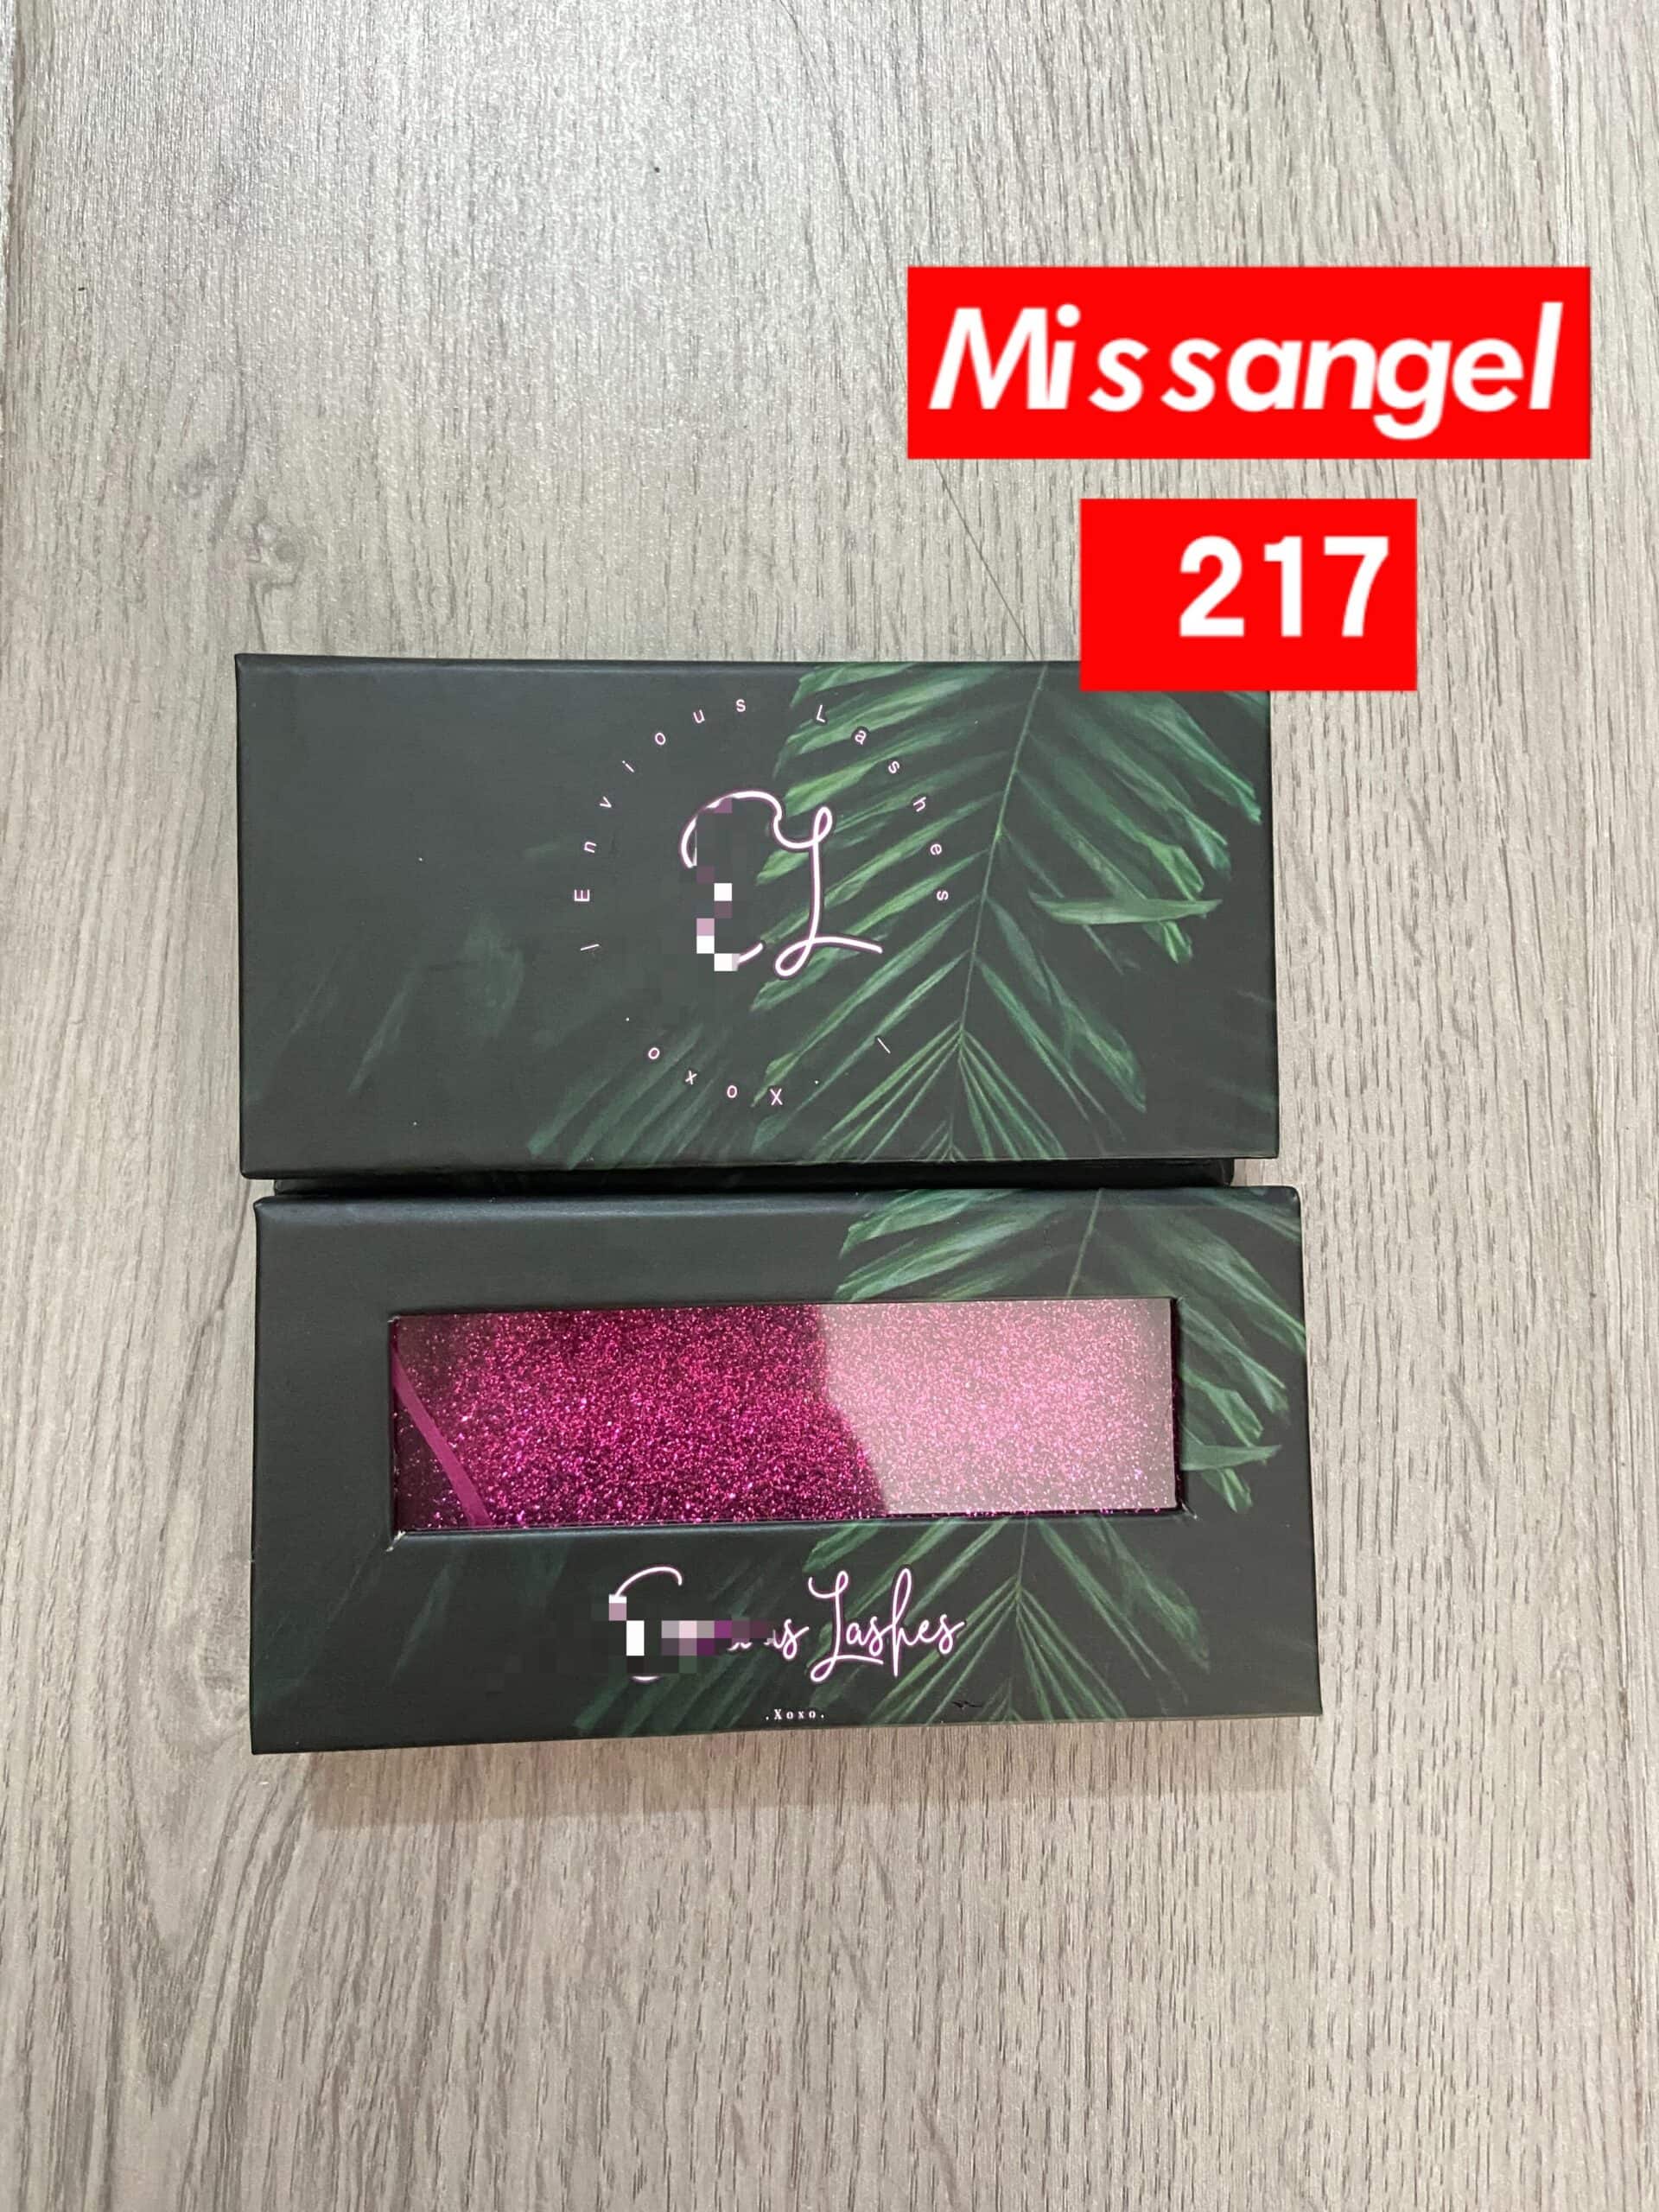 wholesale mink lashes and boxes